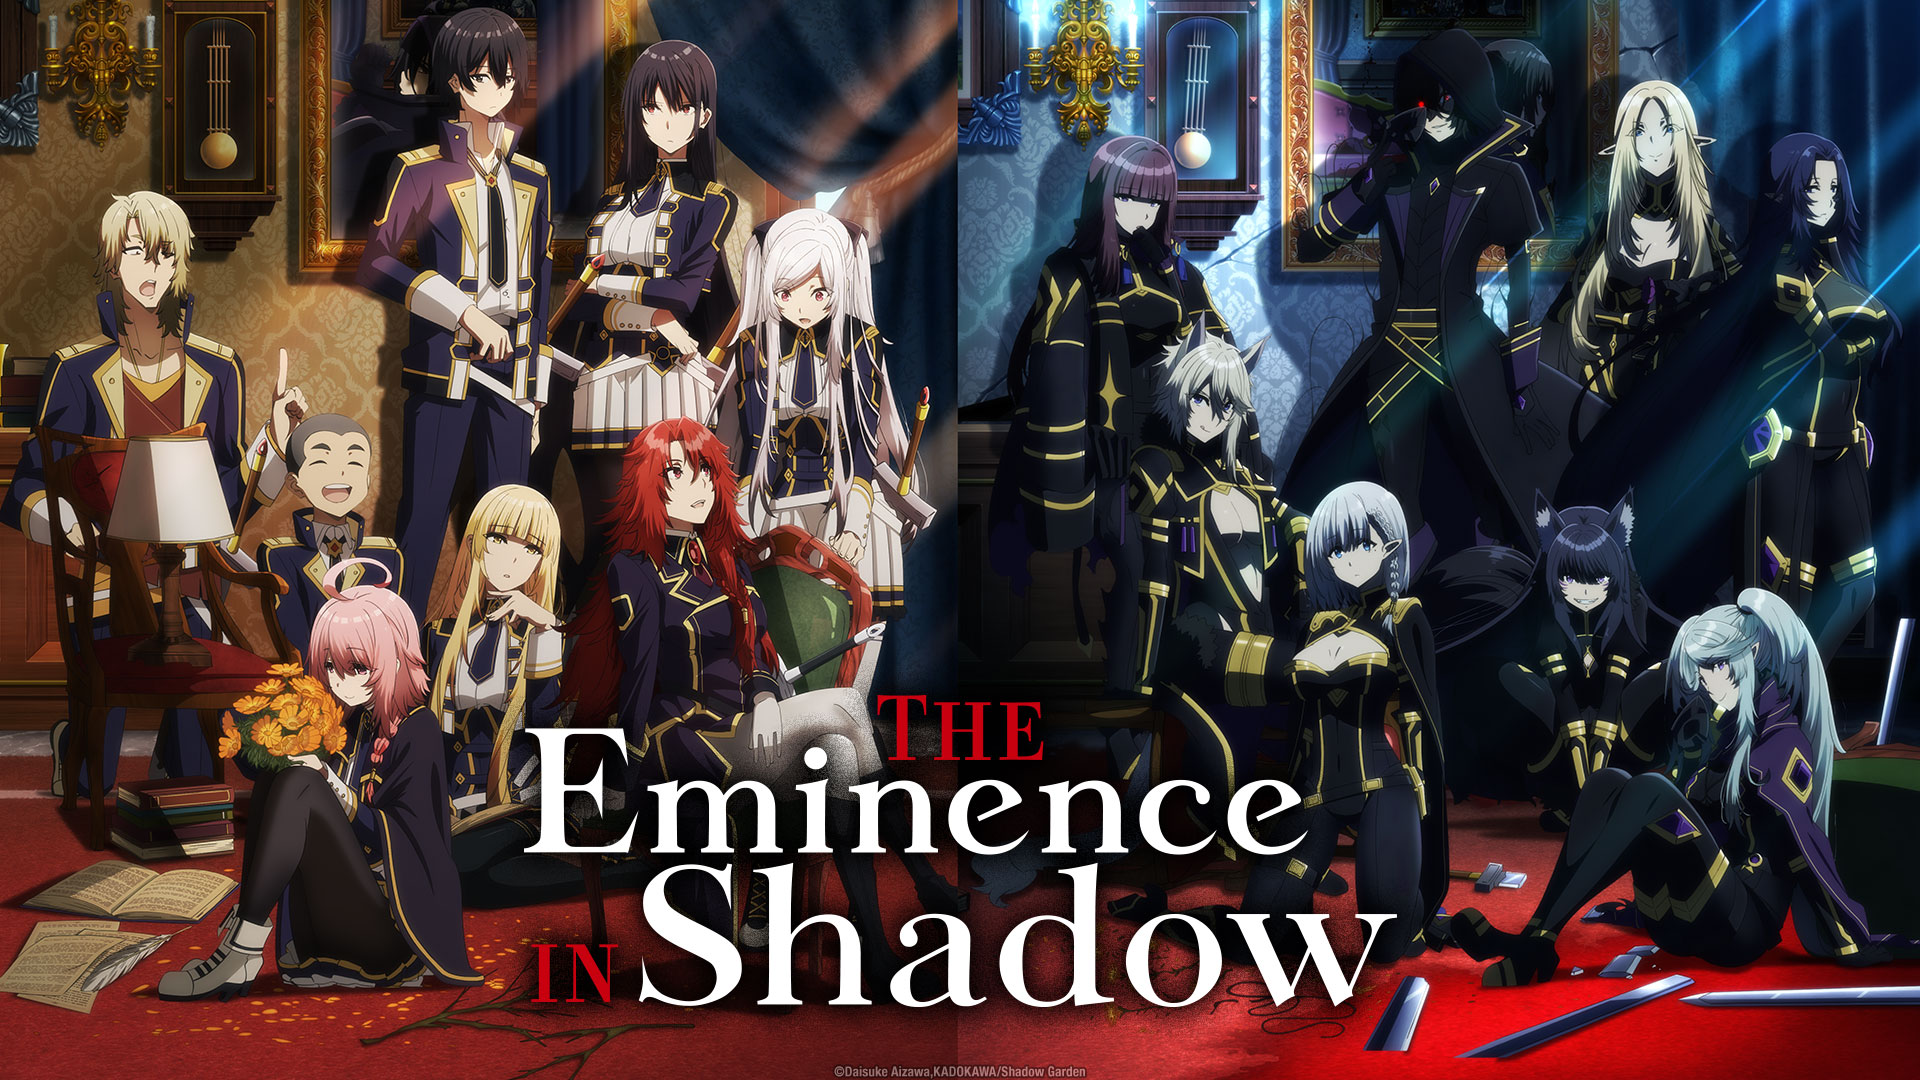 Uncover Hidden Gems Find Out Where to Stream 'The Eminence in Shadow' Season 2 Now